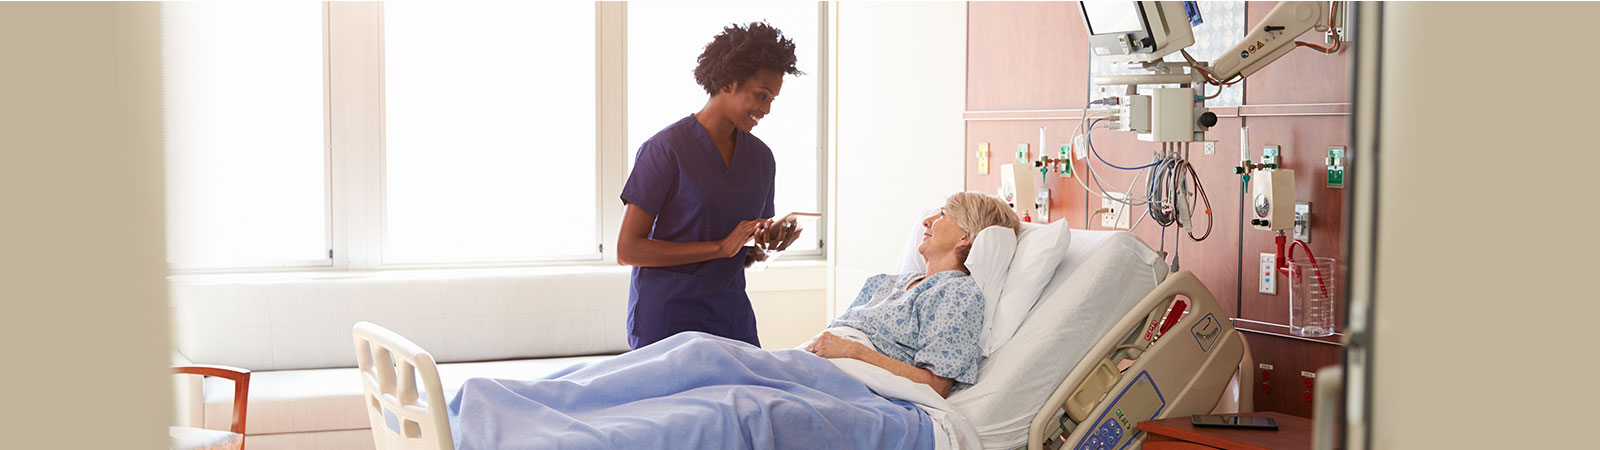 Tablet applications in healthcare solutions